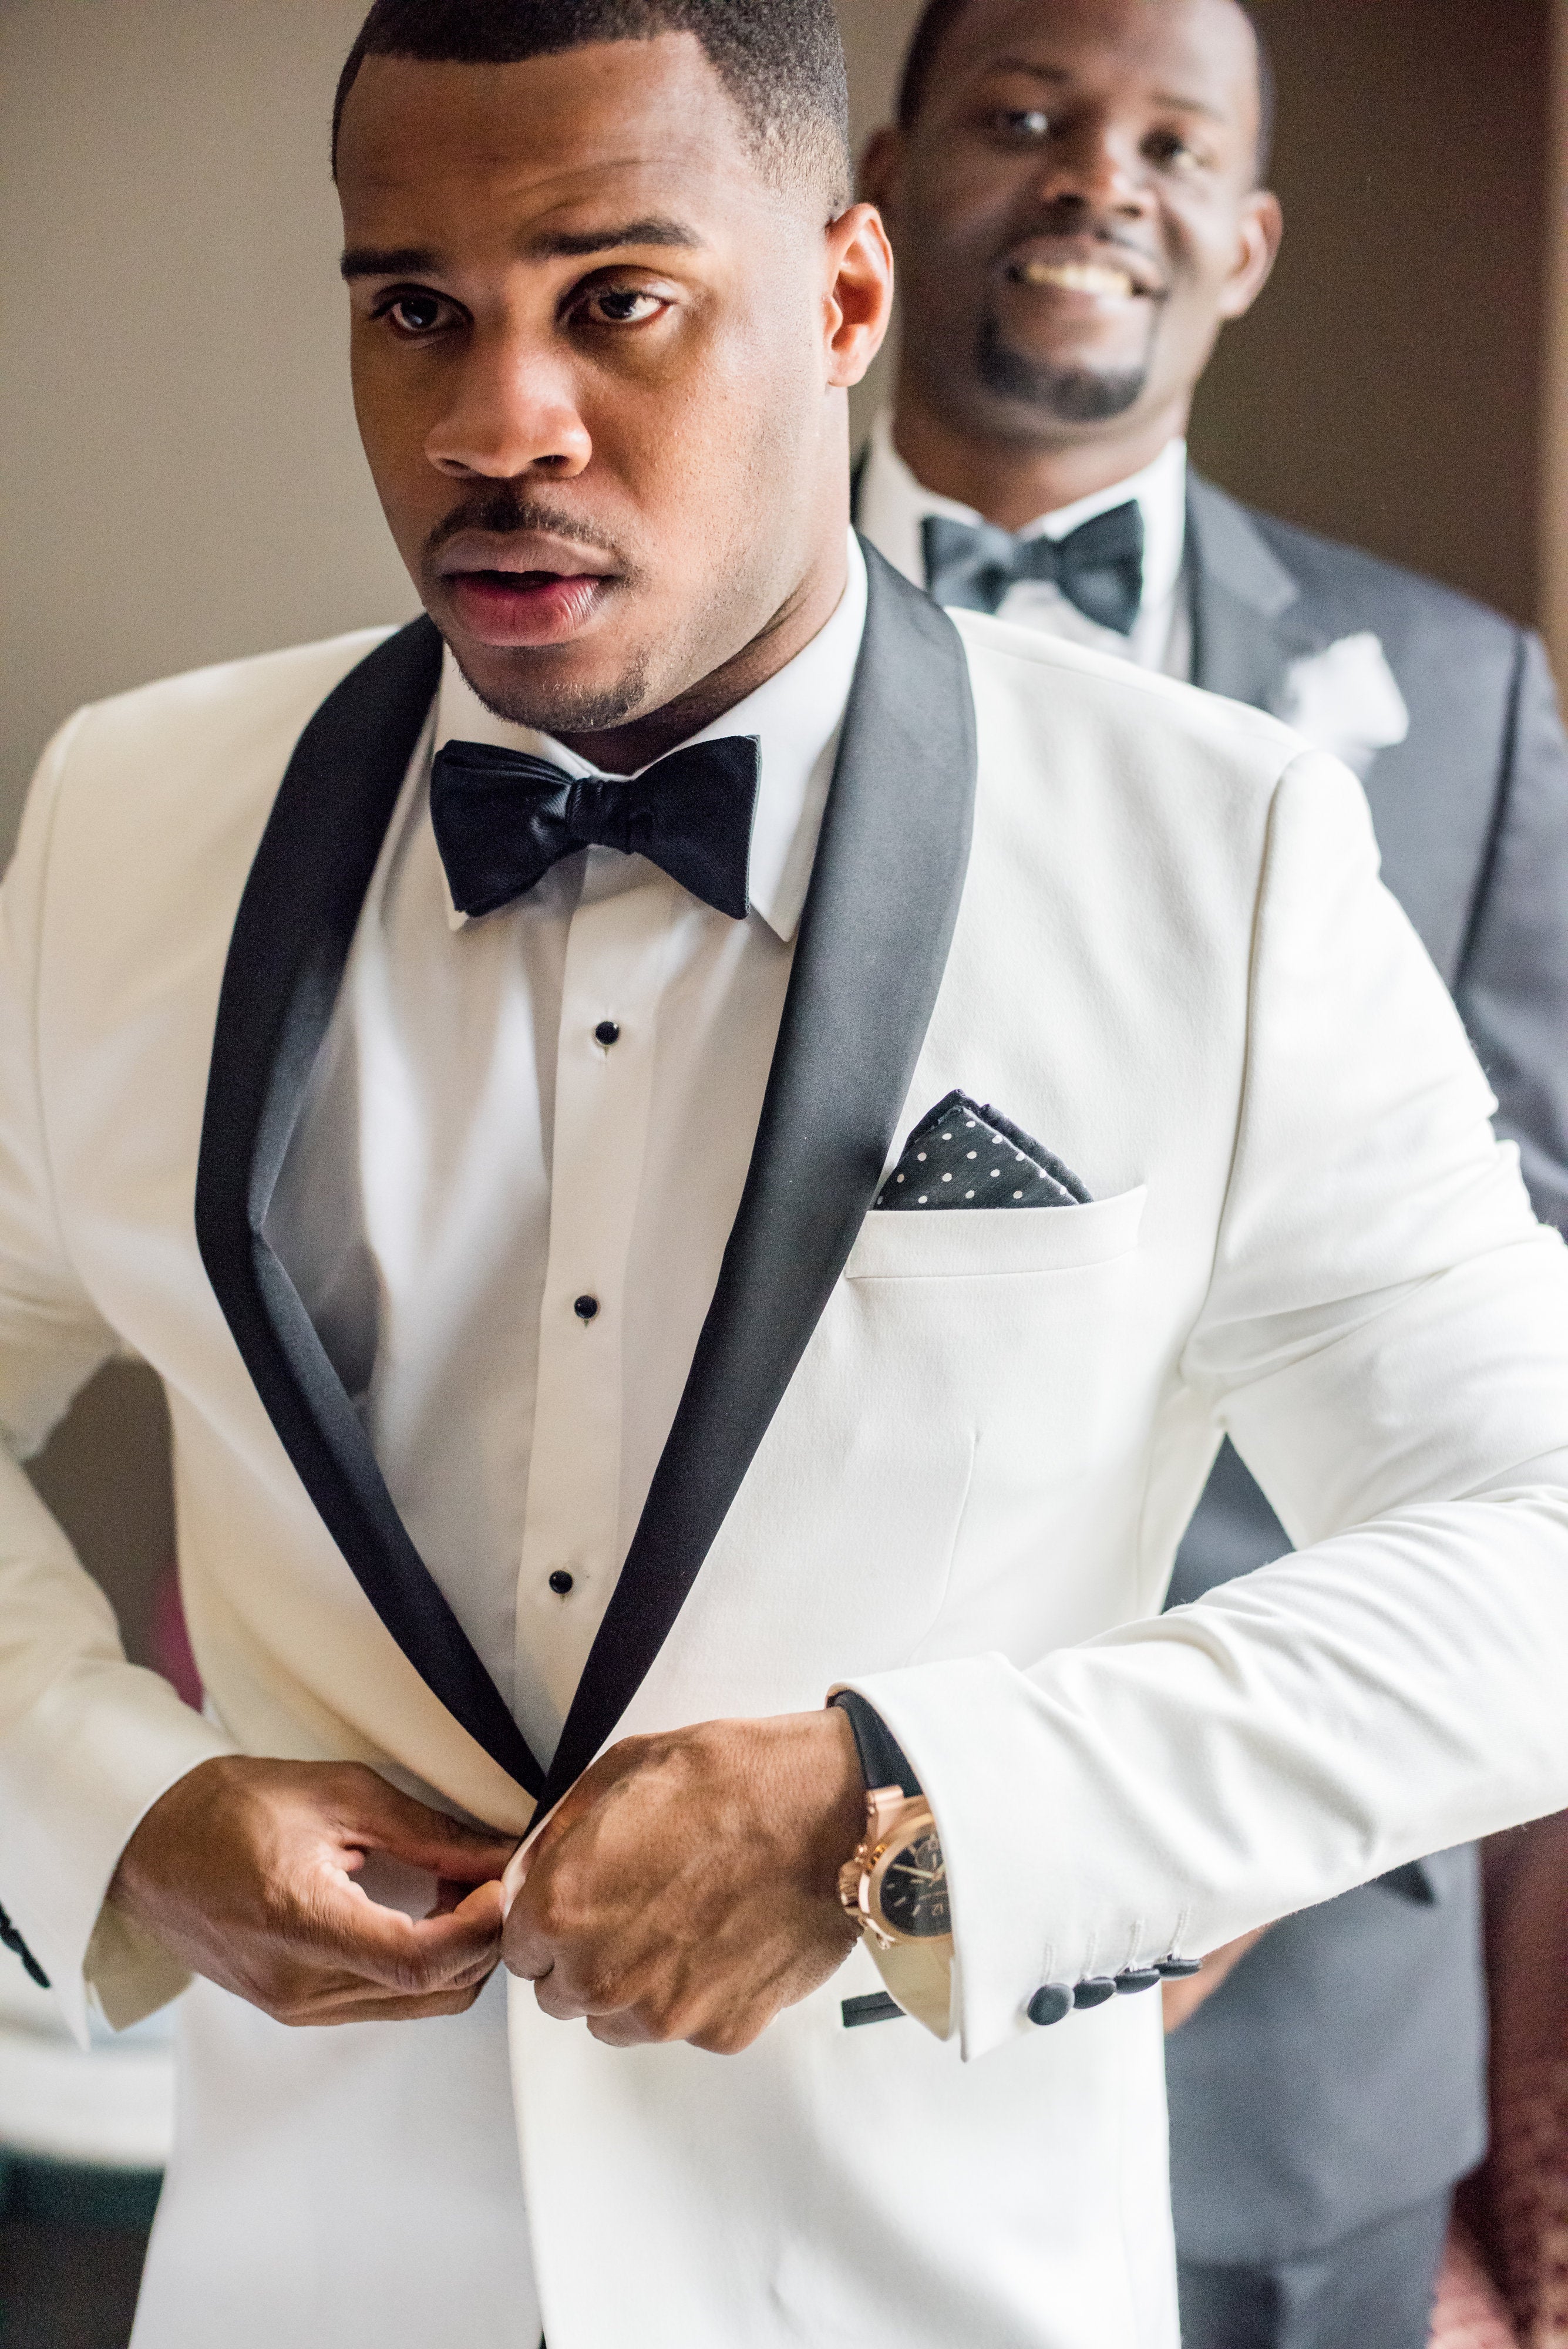 Bridal Bliss: Bakari and Kandice's 1920s Glam Wedding Was The Perfect Party
